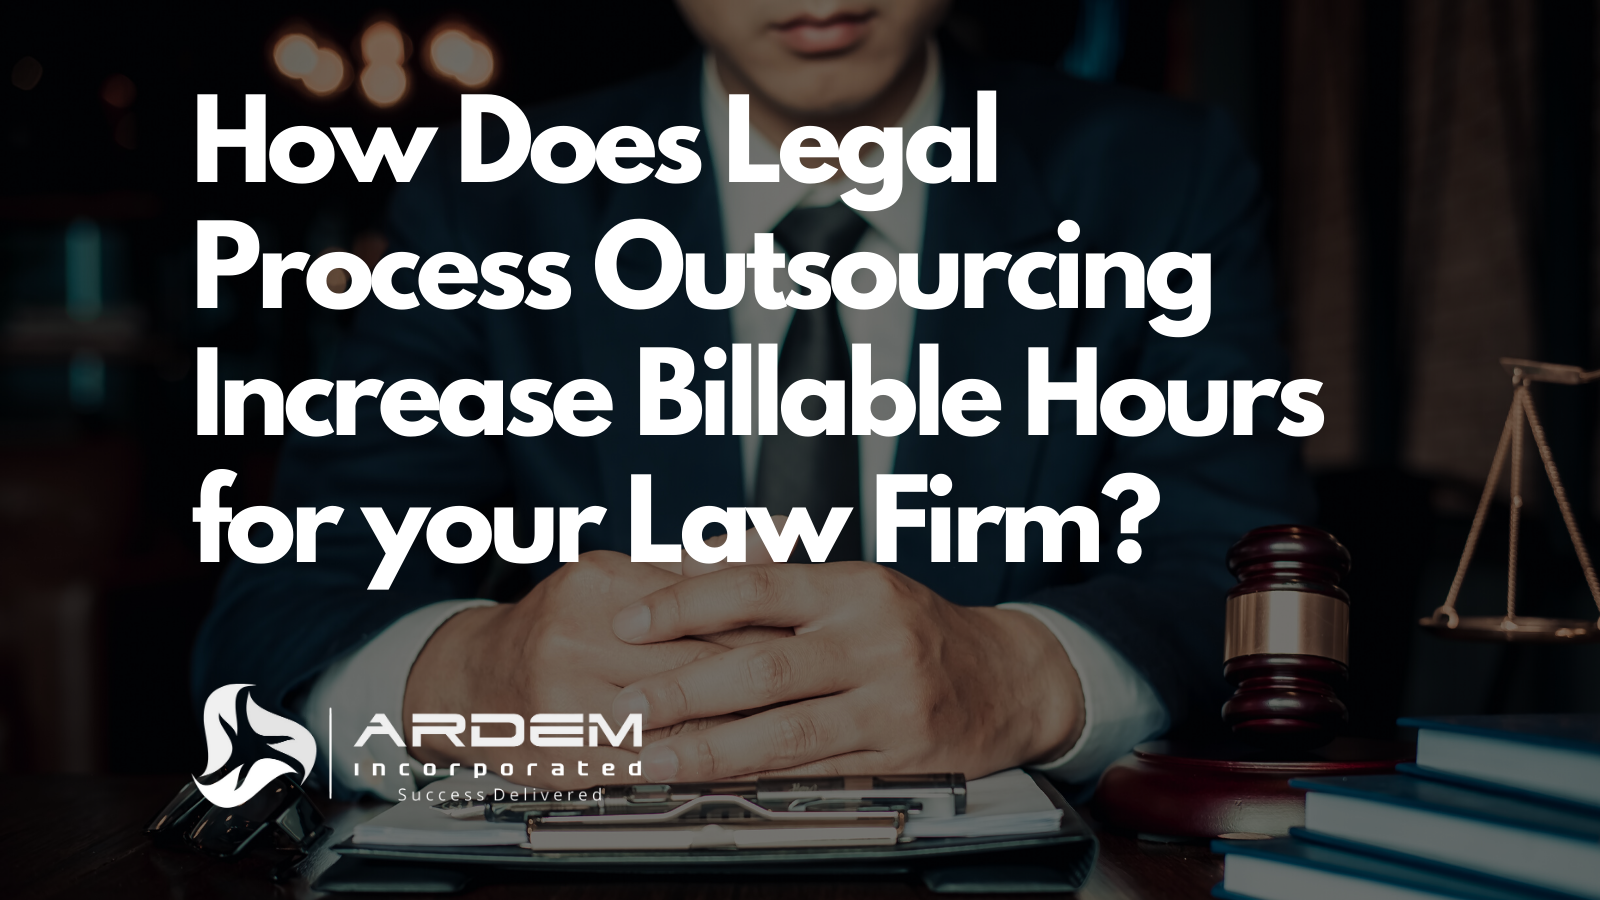 Law Firm Legal Process Outsourcing Blog